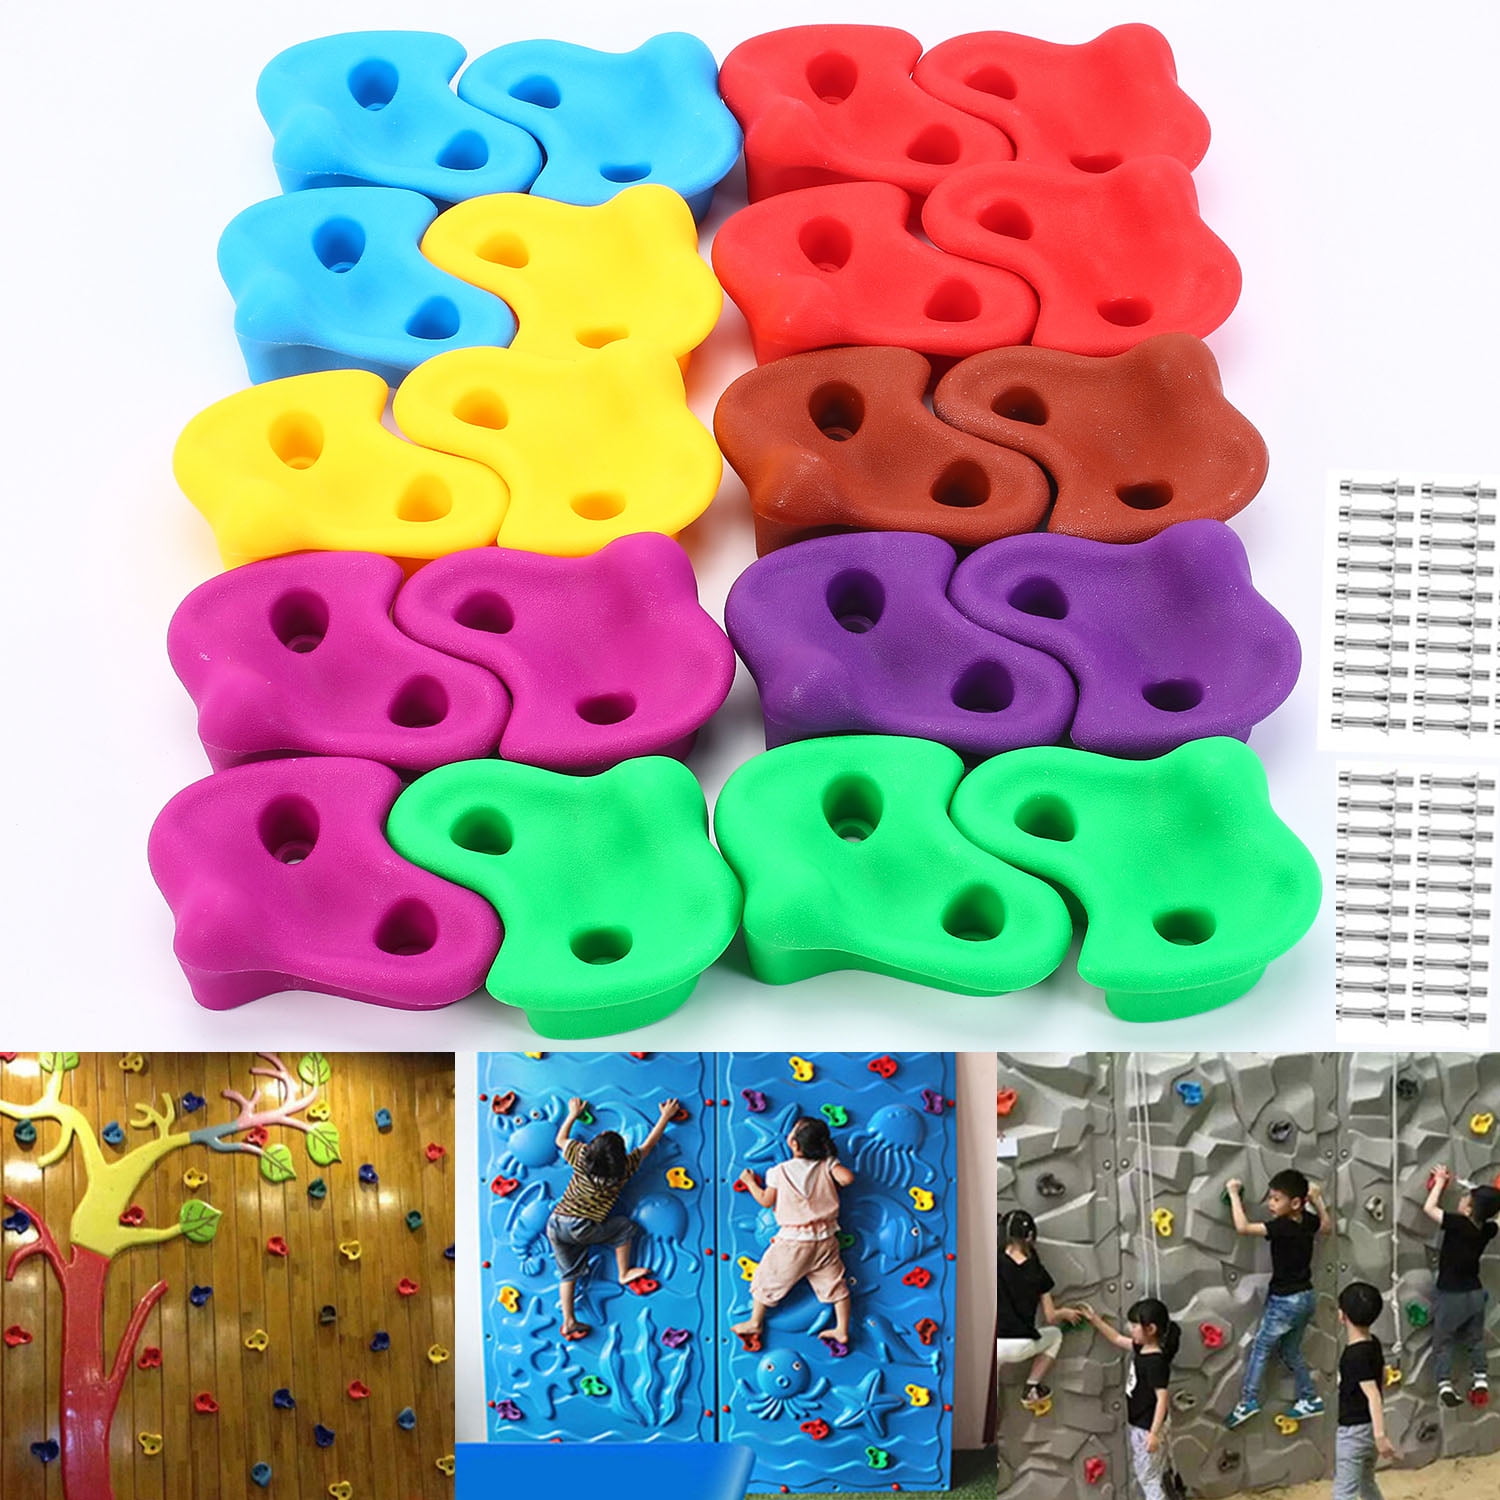 36 Large BLUE Textured Kids Playground Wall Climbing Rocks Holds NEW 